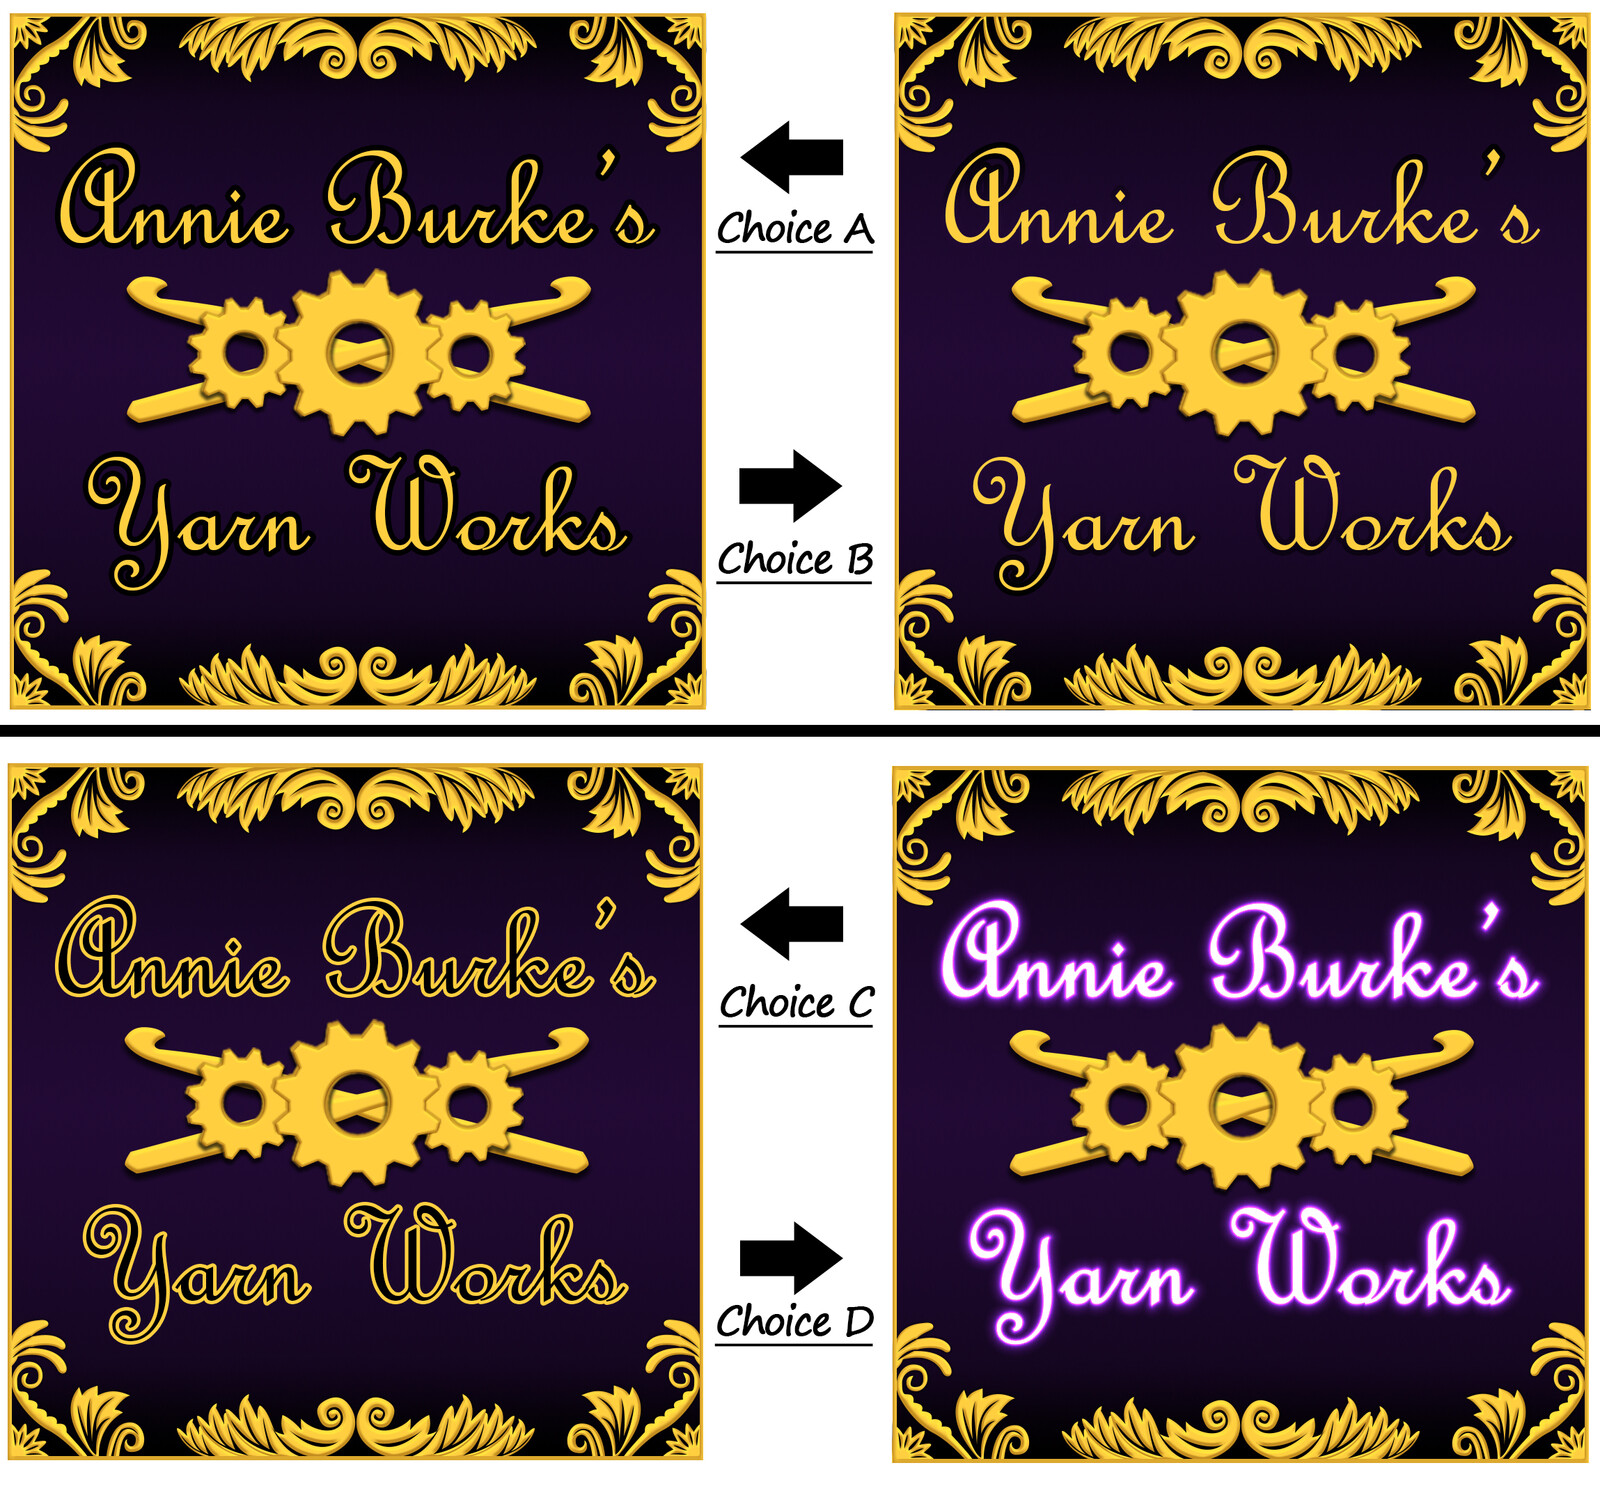 Various iterations of the receipt banner (last)